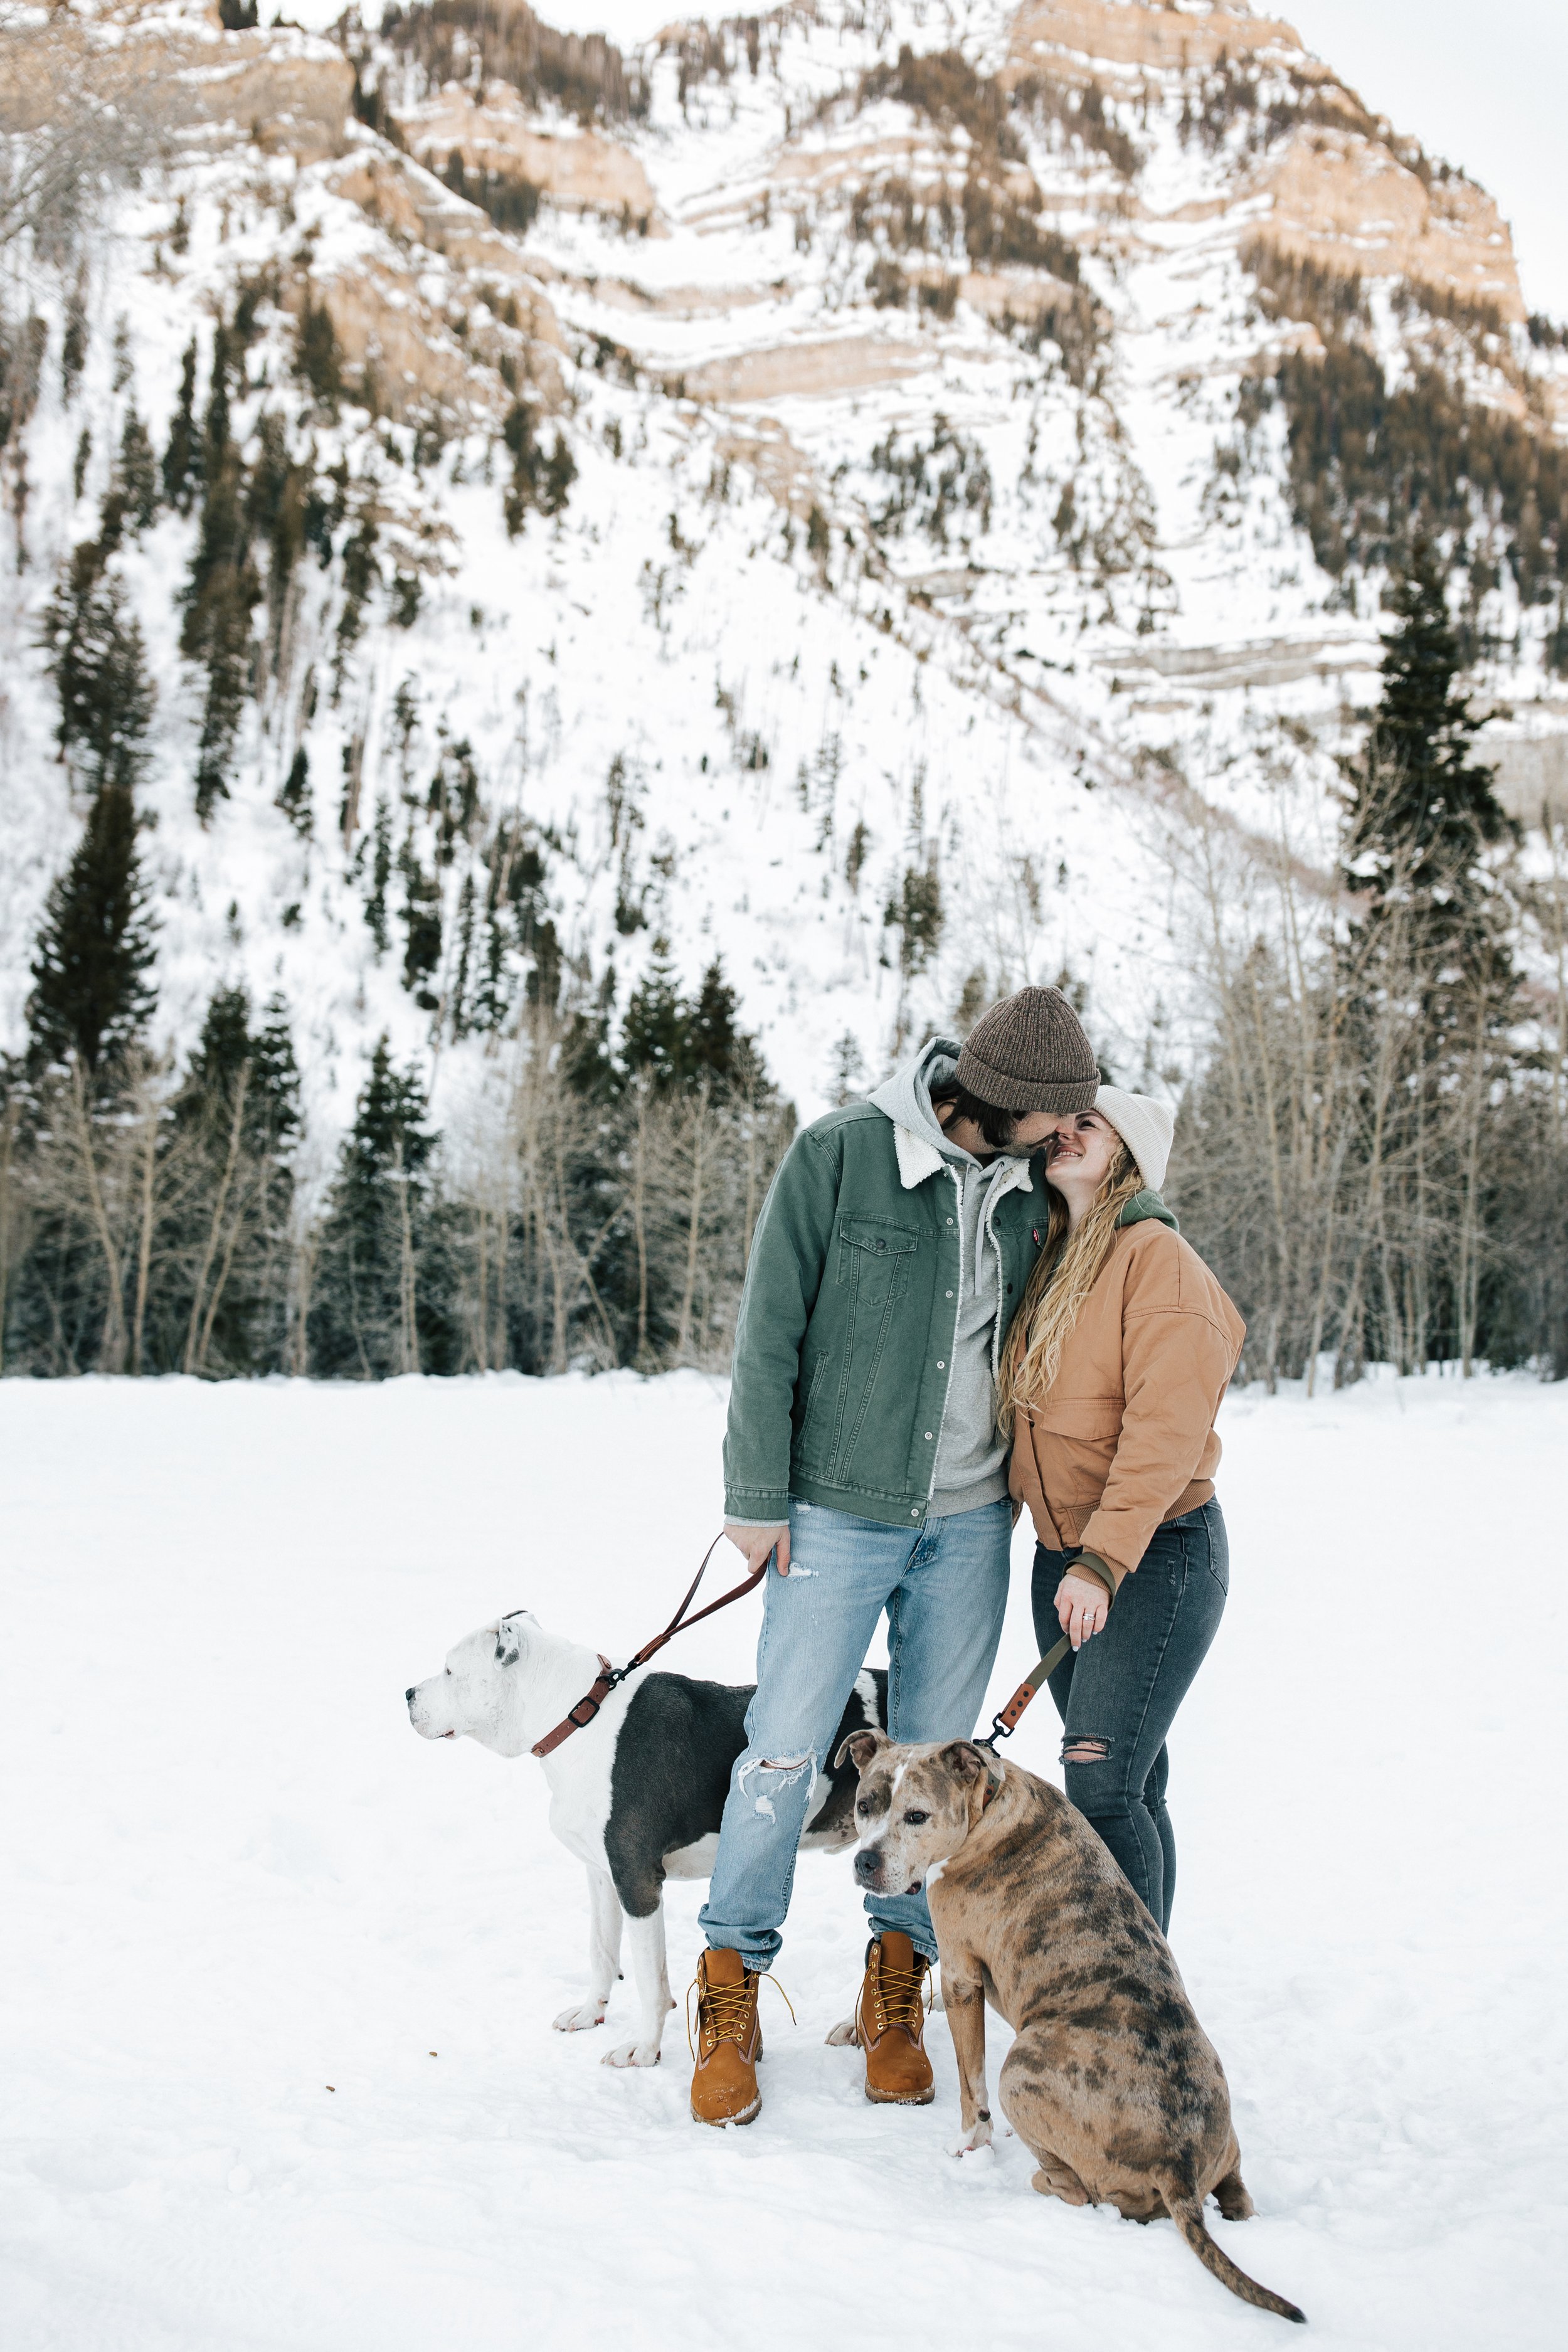  Winter photoshoot outfit inspo. Man and woman kiss in the snowy mountains wearing coats and beanies with their dogs. Utah mountain engagement shoot in the winter. Park City, Utah photographer. #winter #engagements #engagementsession #utahphotoshoot 